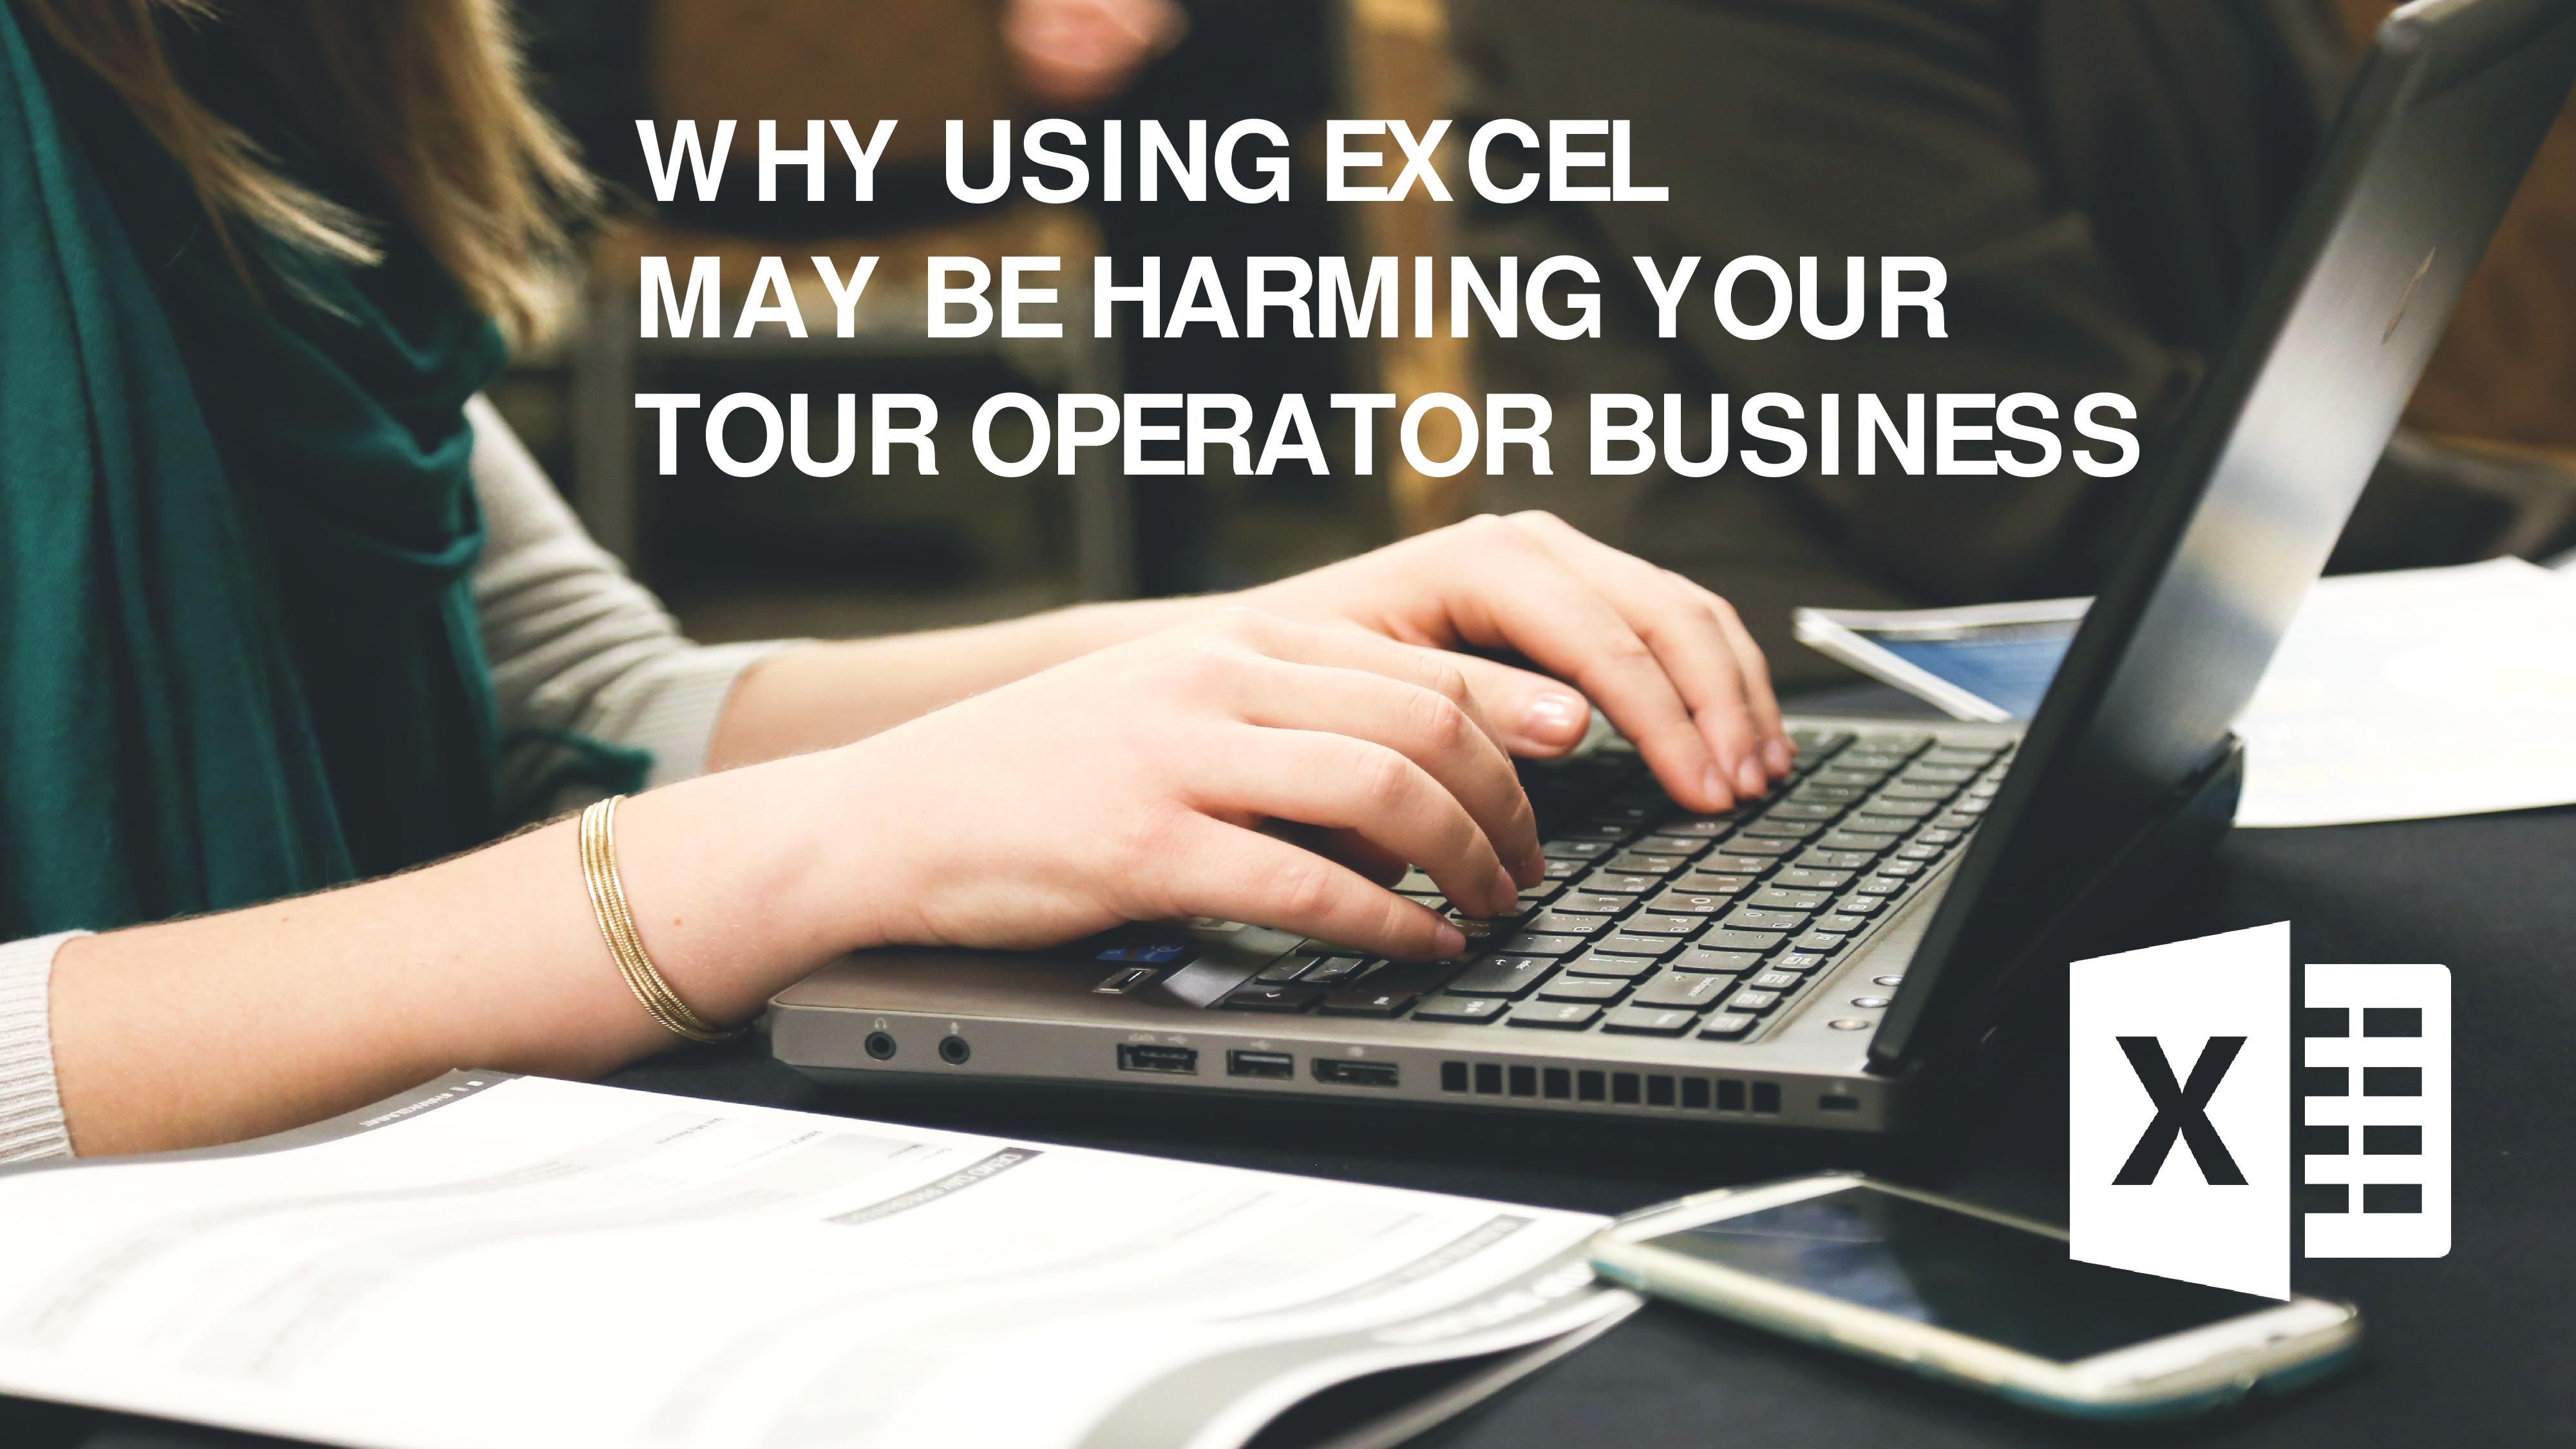 Why using excel may be harming your tour operator business